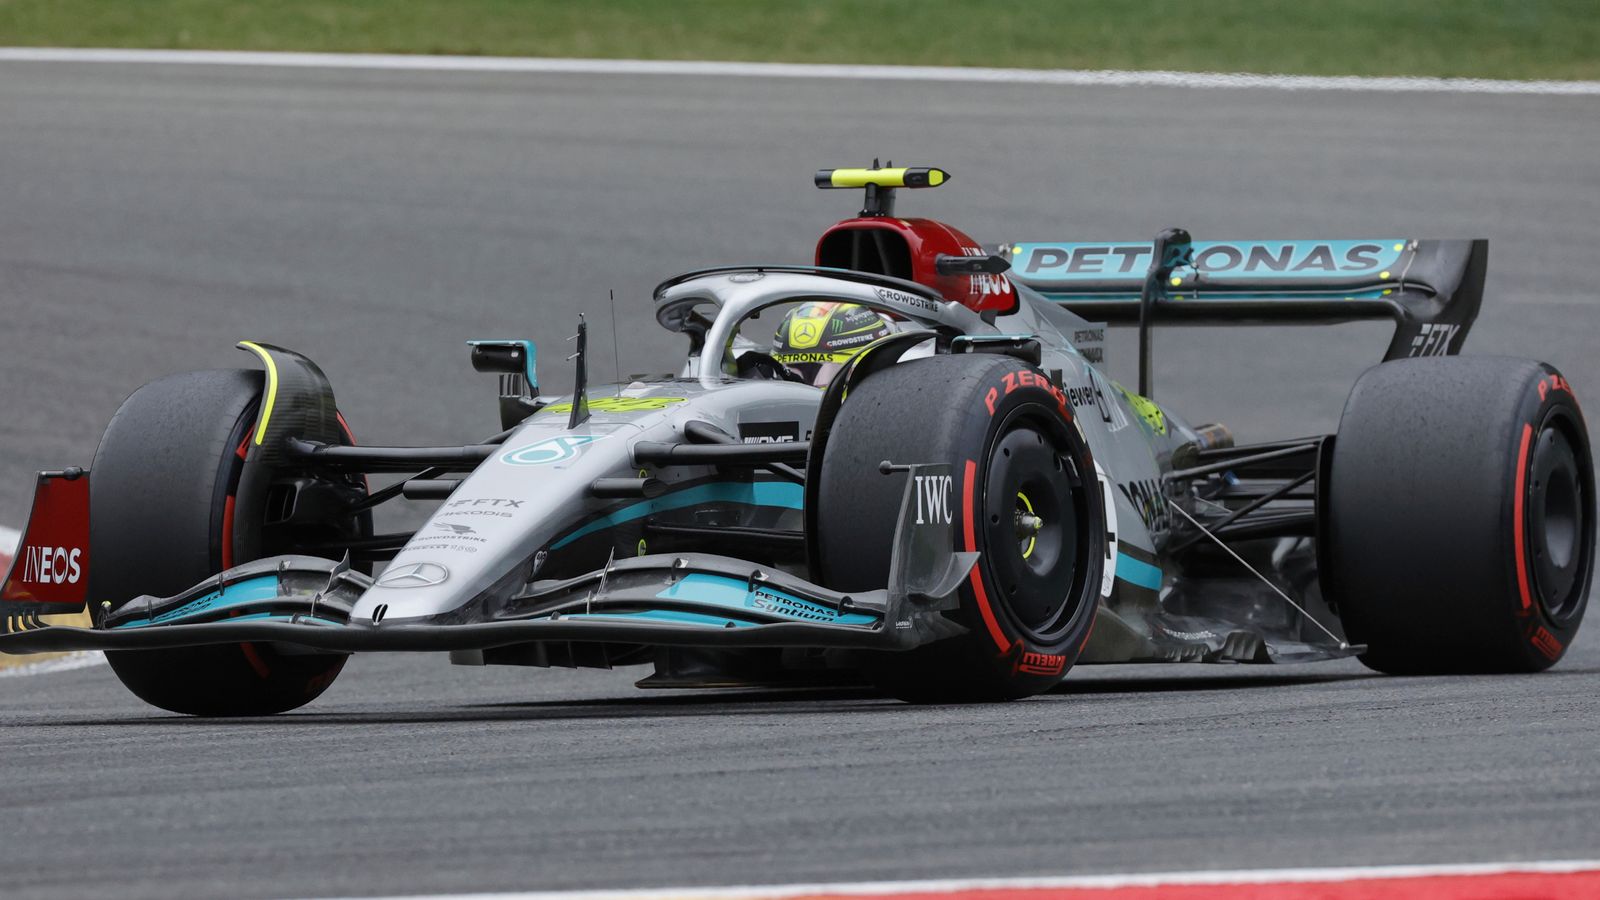 Belgian Grand Prix Live updates from qualifying as F1 resumes after